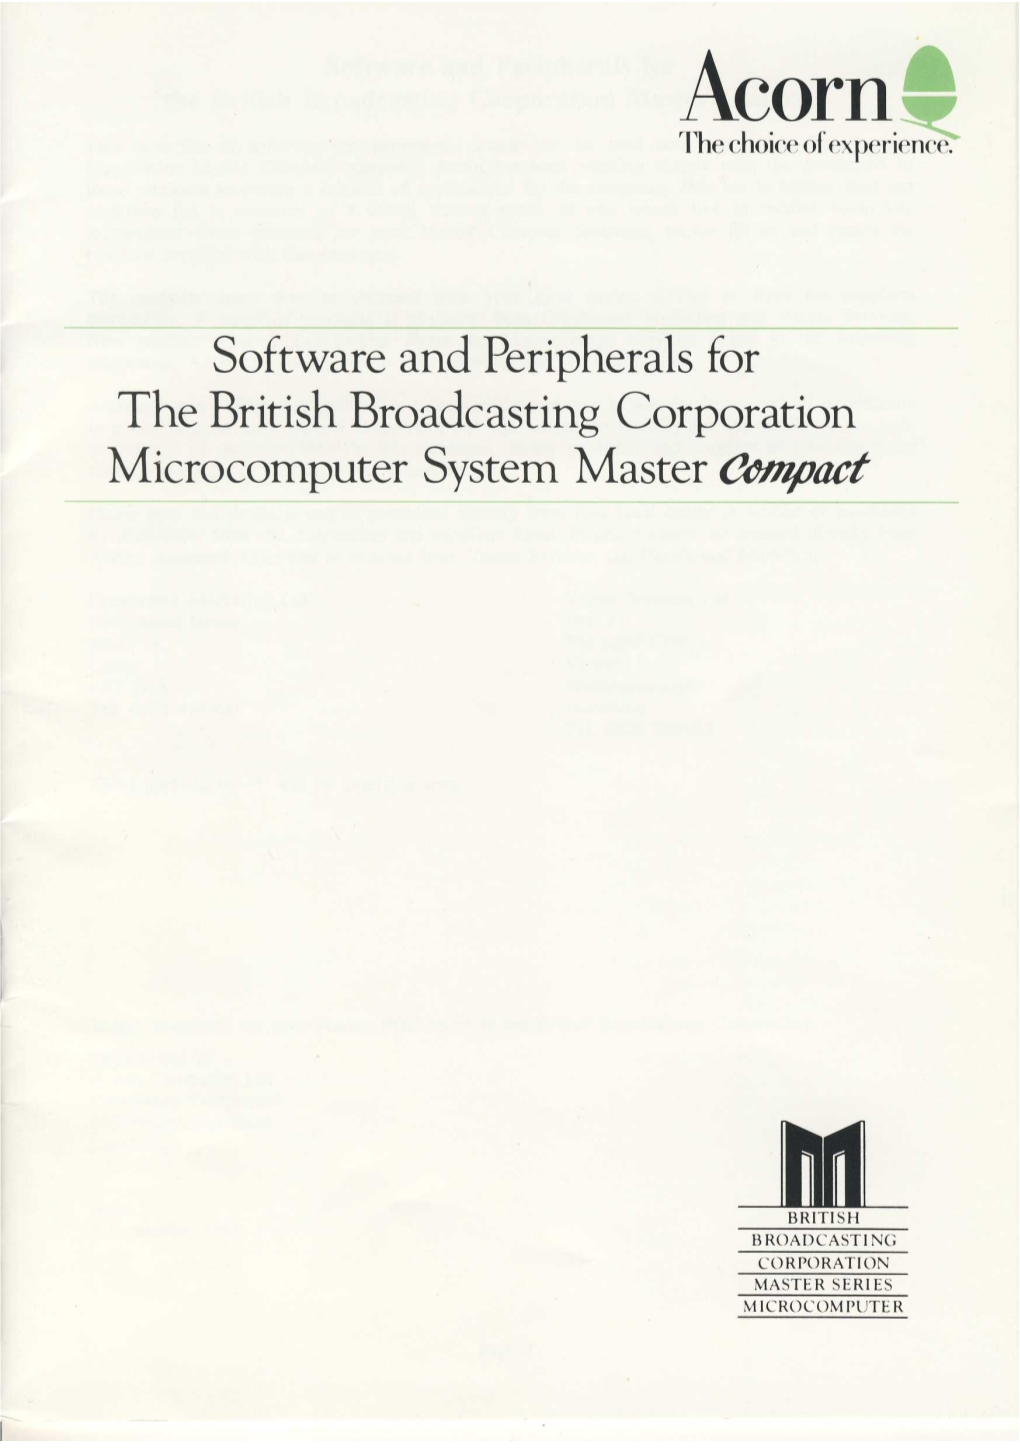 Software and Peripherals for the BBC Master Compact